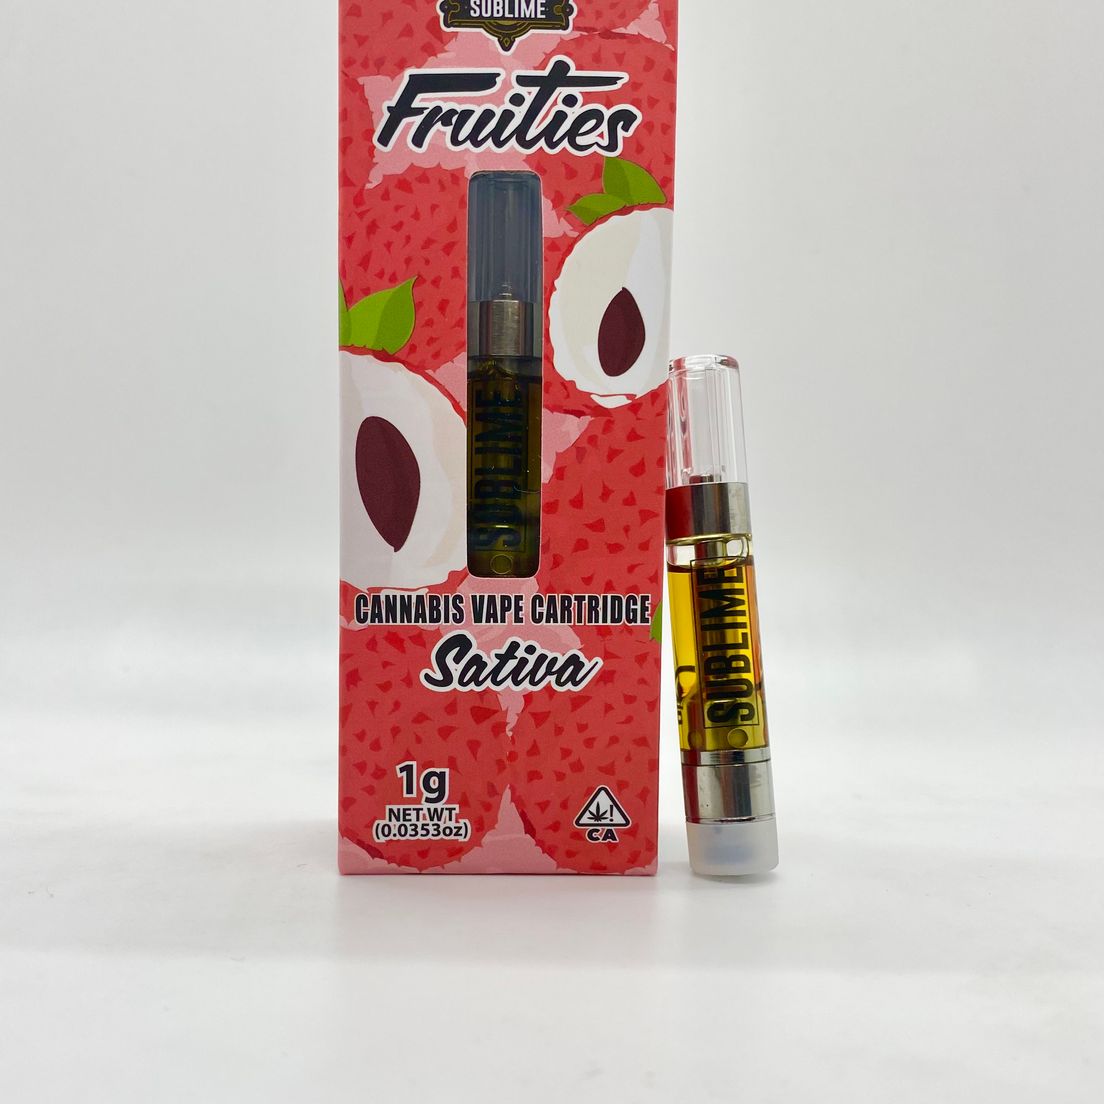 1g Lychee Kush (Sativa) Fruities CCELL Cartridge - Sublime